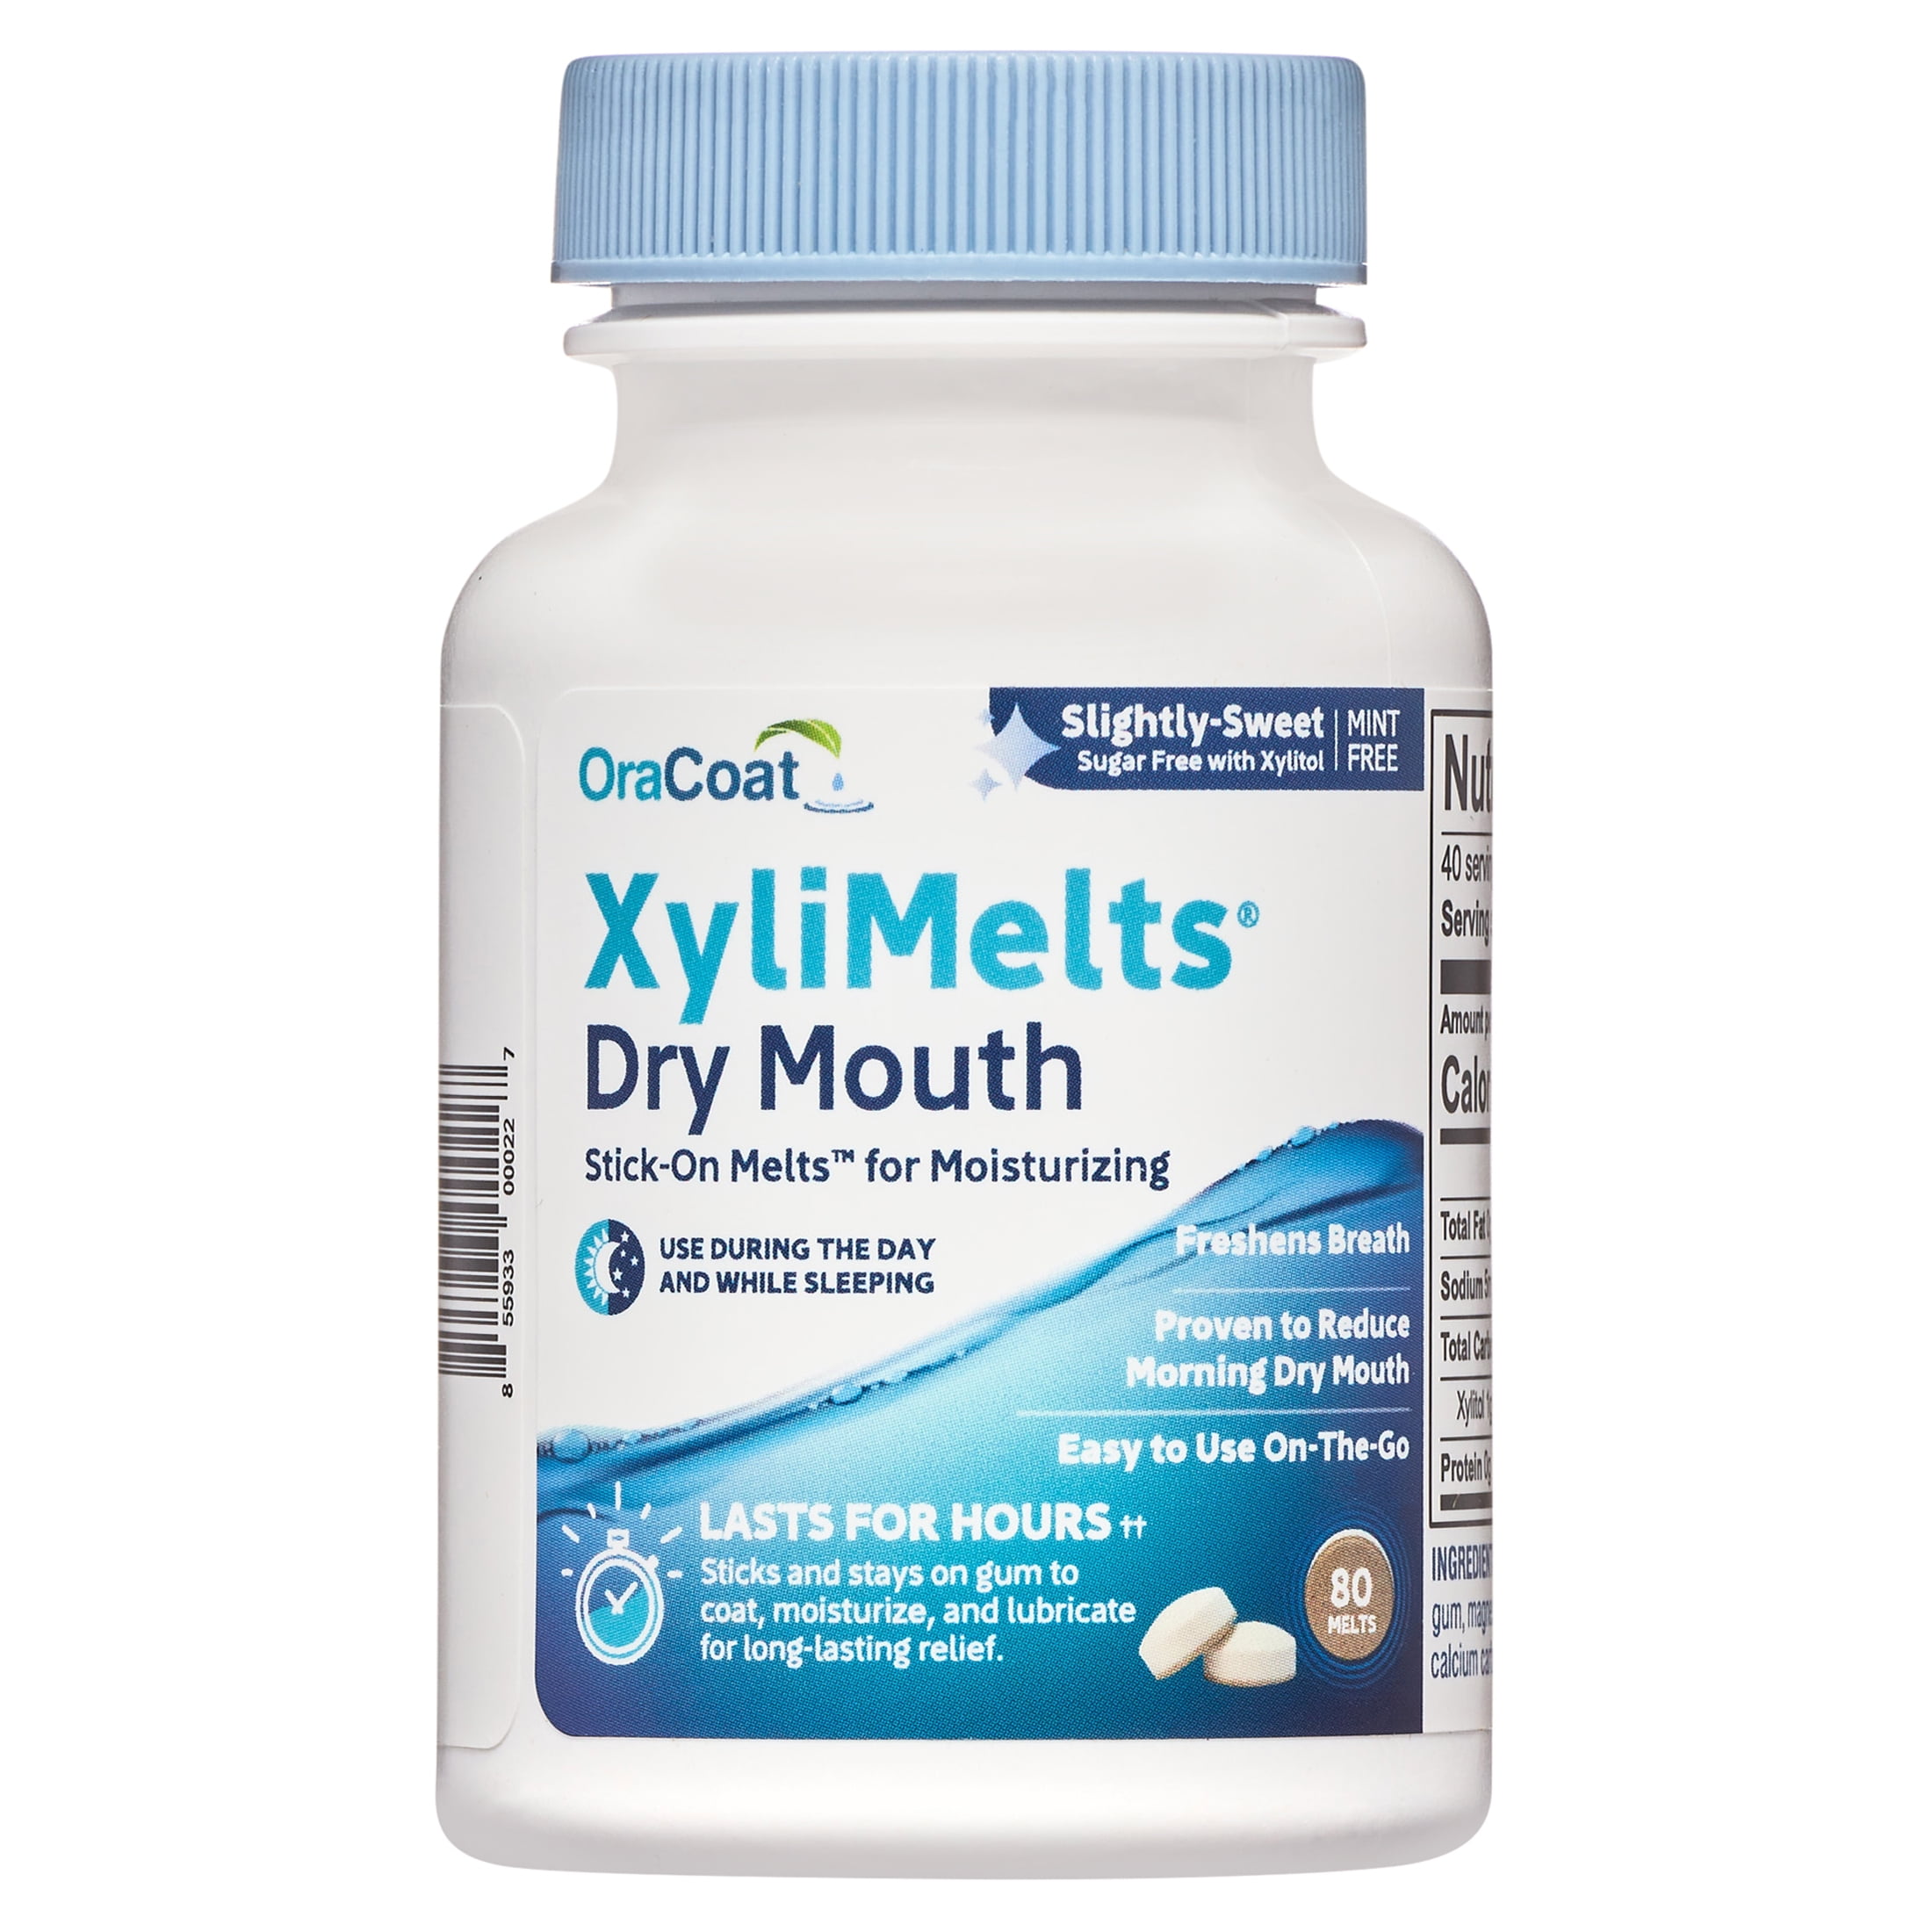 OraCoat XyliMelts for dry mouth, Mint Free, 80 ct Box